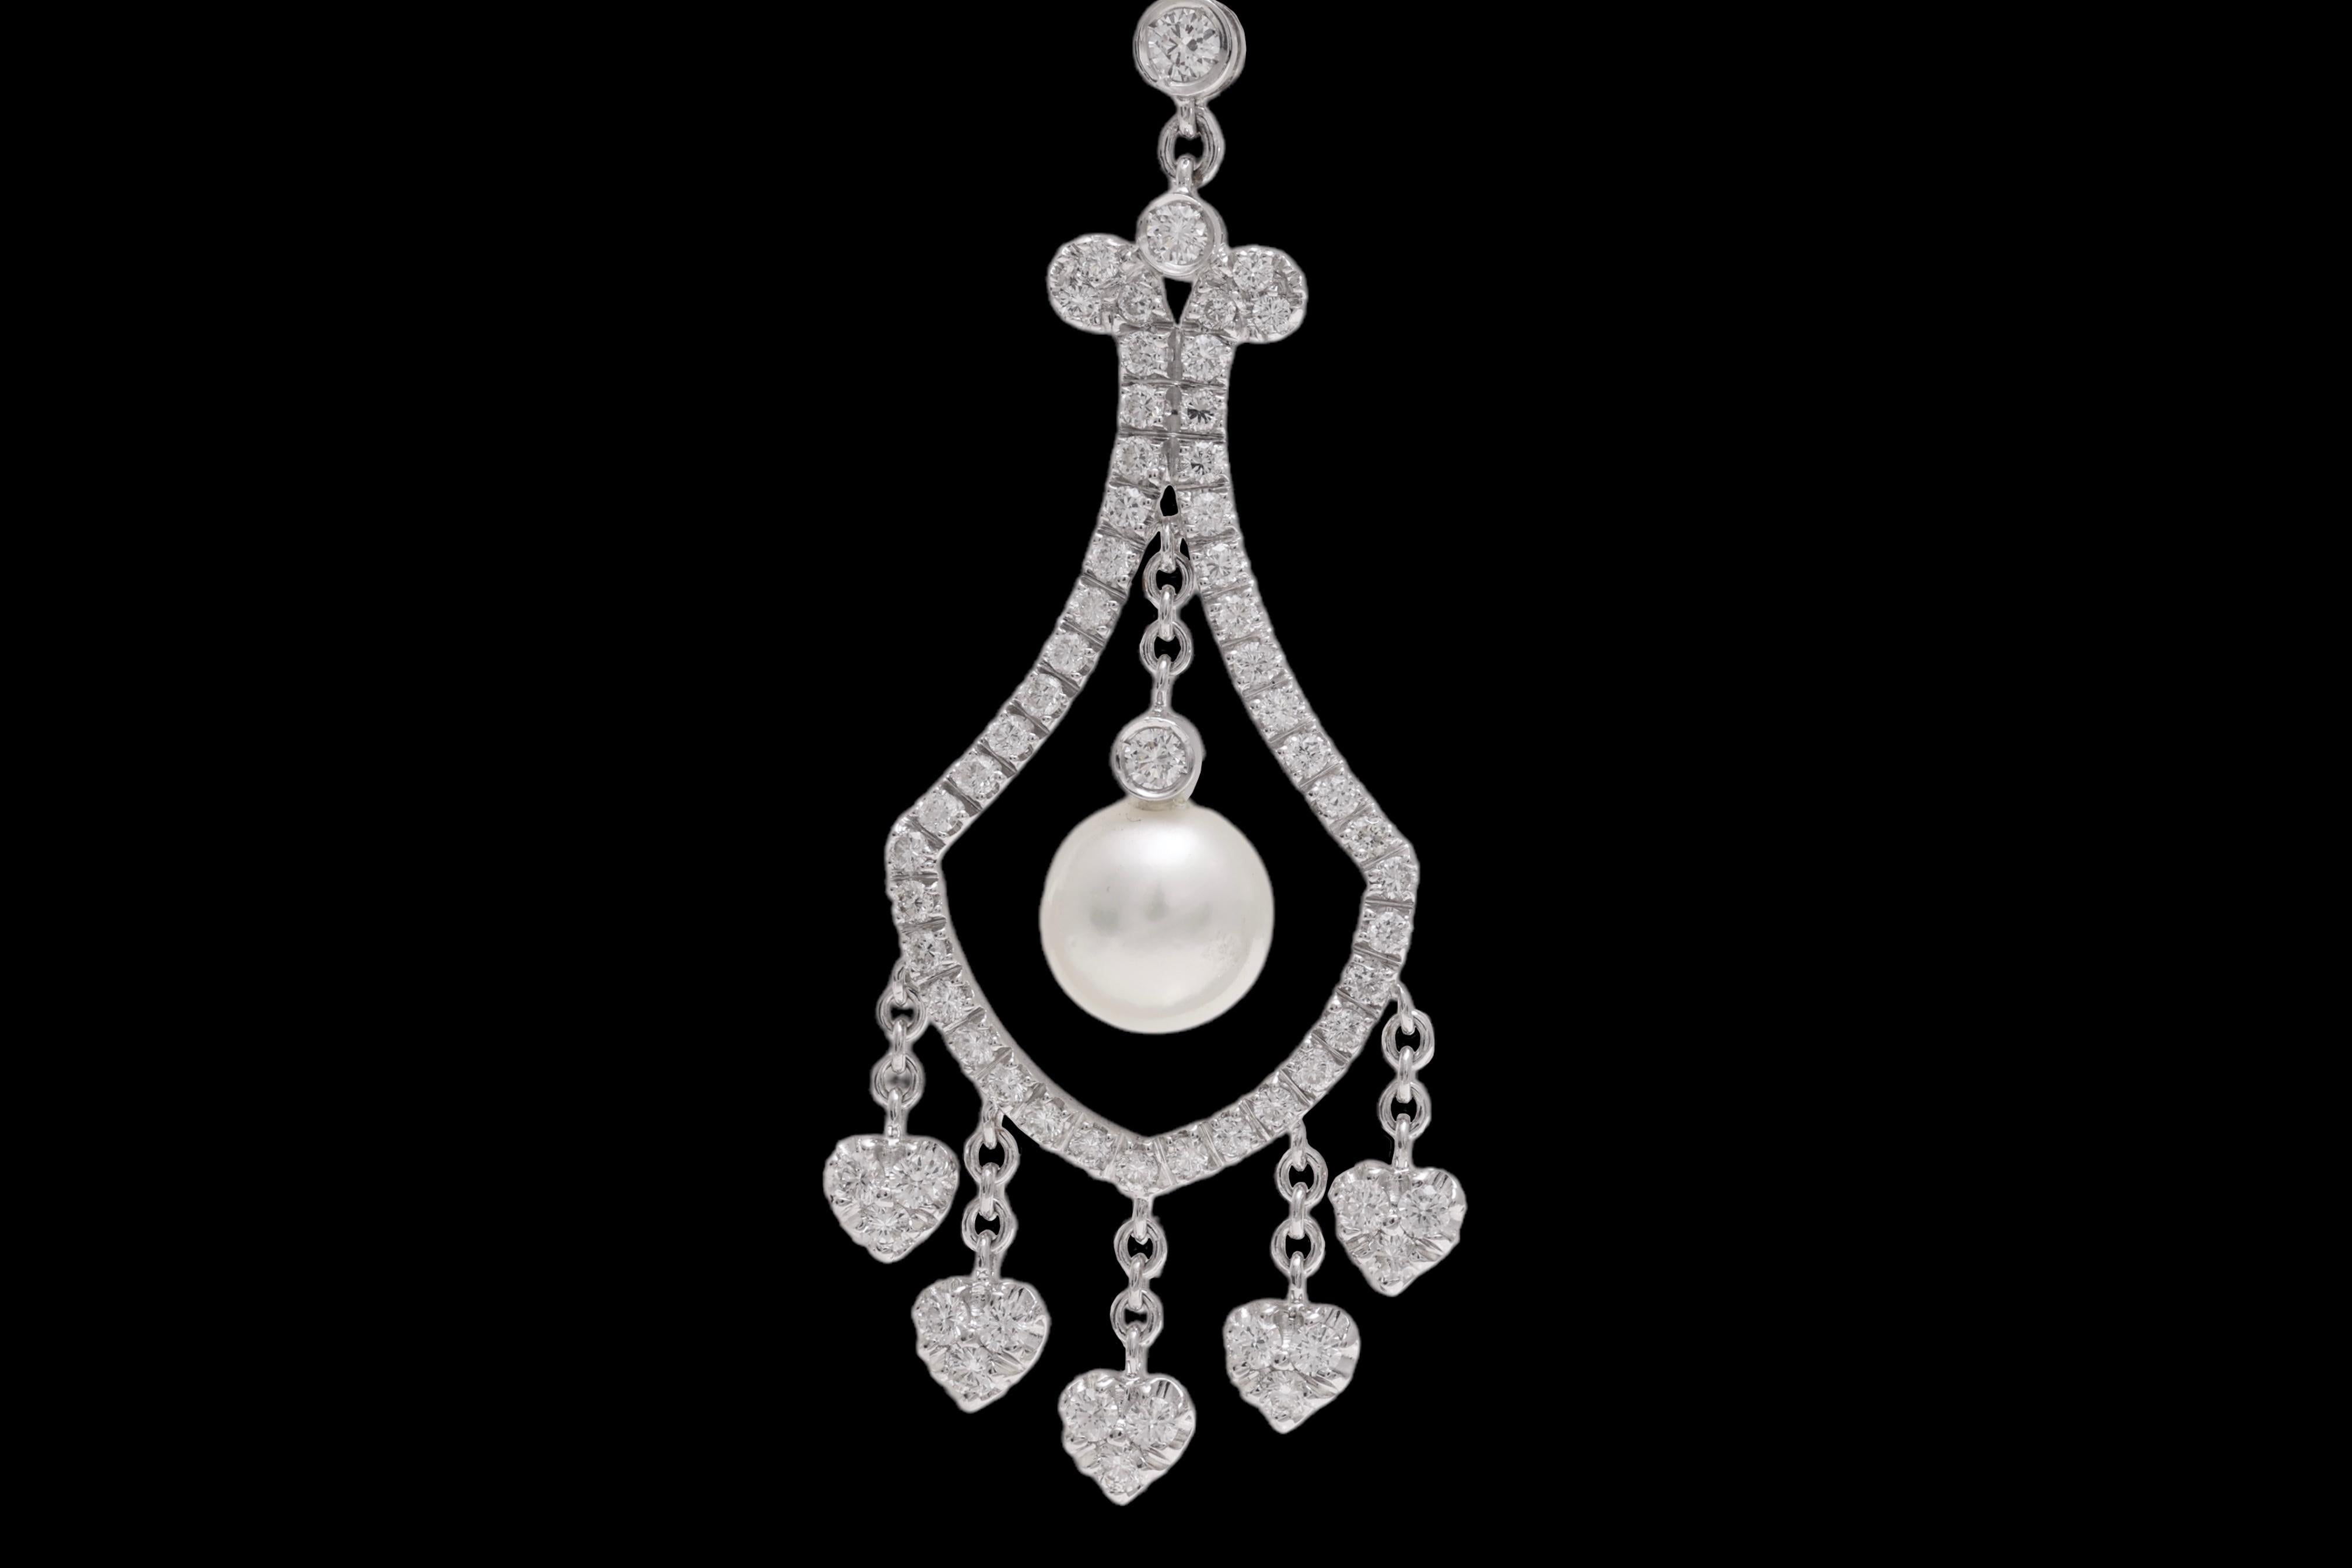 Brilliant Cut 18 kt. white Gold Chandelier / Dangle Earrings With Pearls and 2.47 ct. Diamonds For Sale